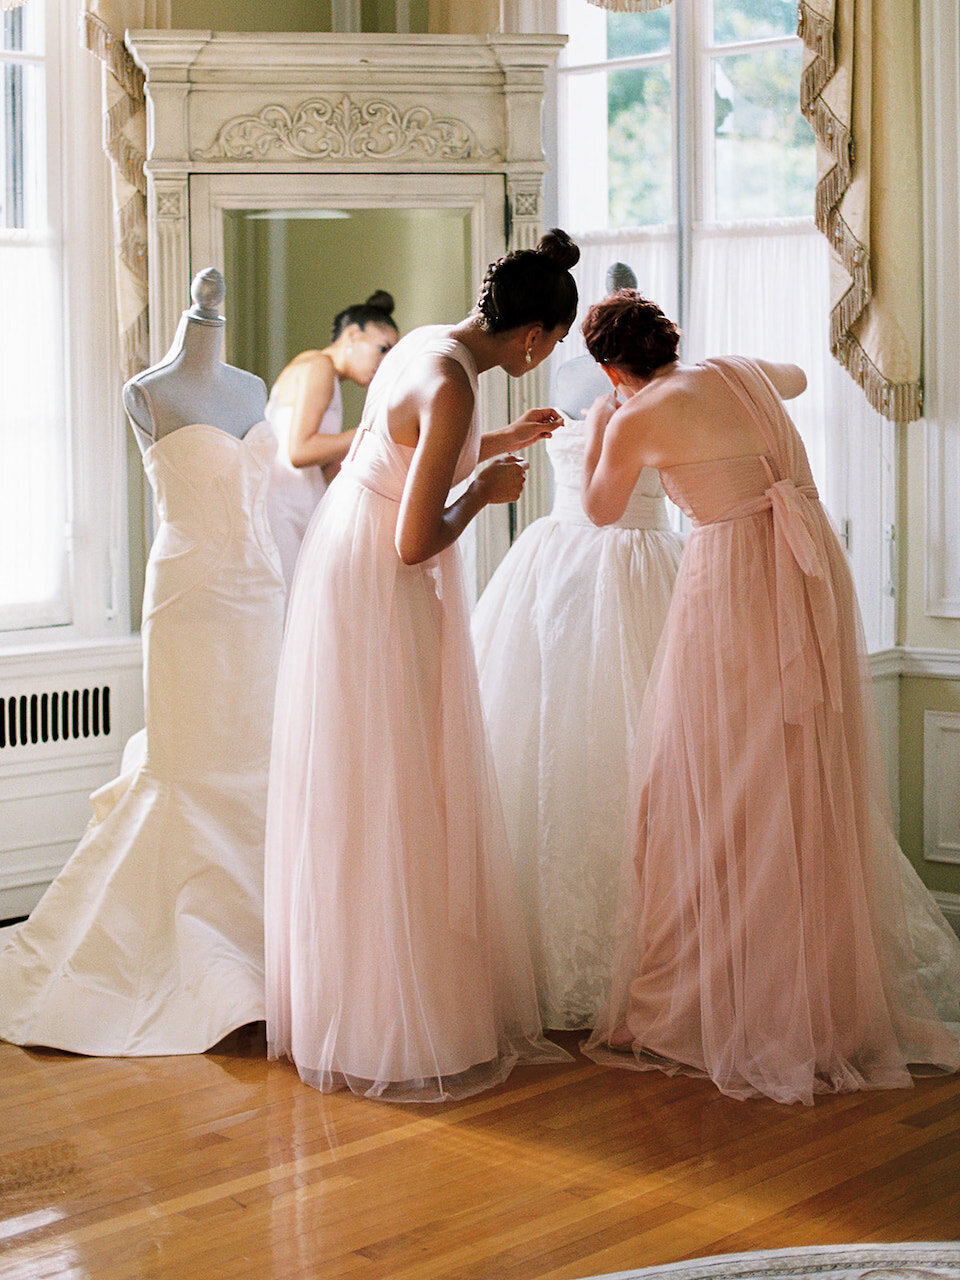 Bridemaids and bride getting ready for a destination wedding